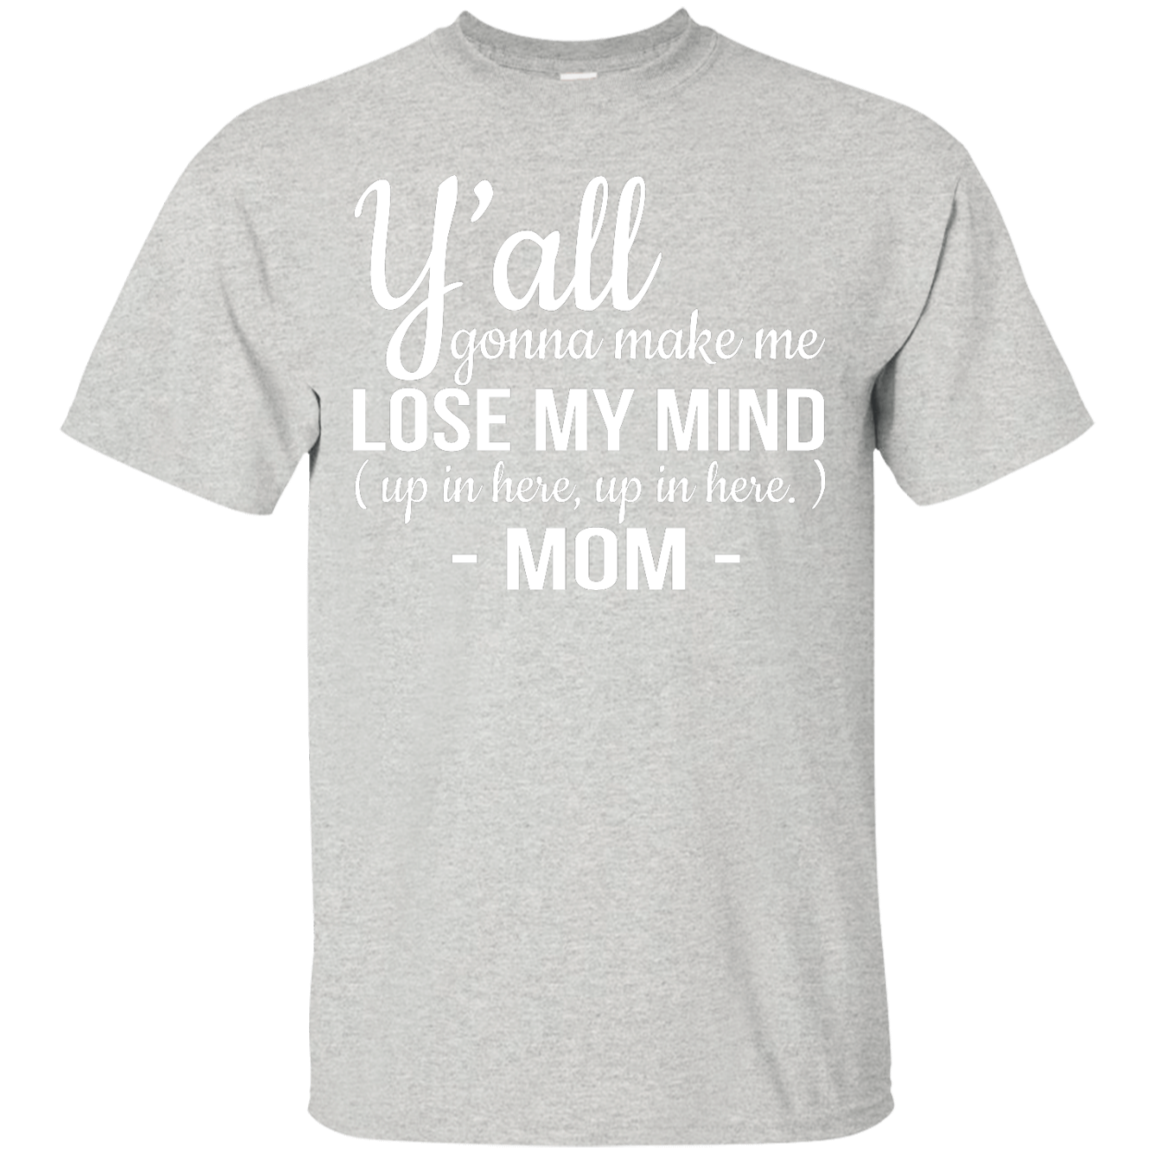 Mom: Y'all Gonna Make Me Lose My Mind Up In Here Up In Here shirt